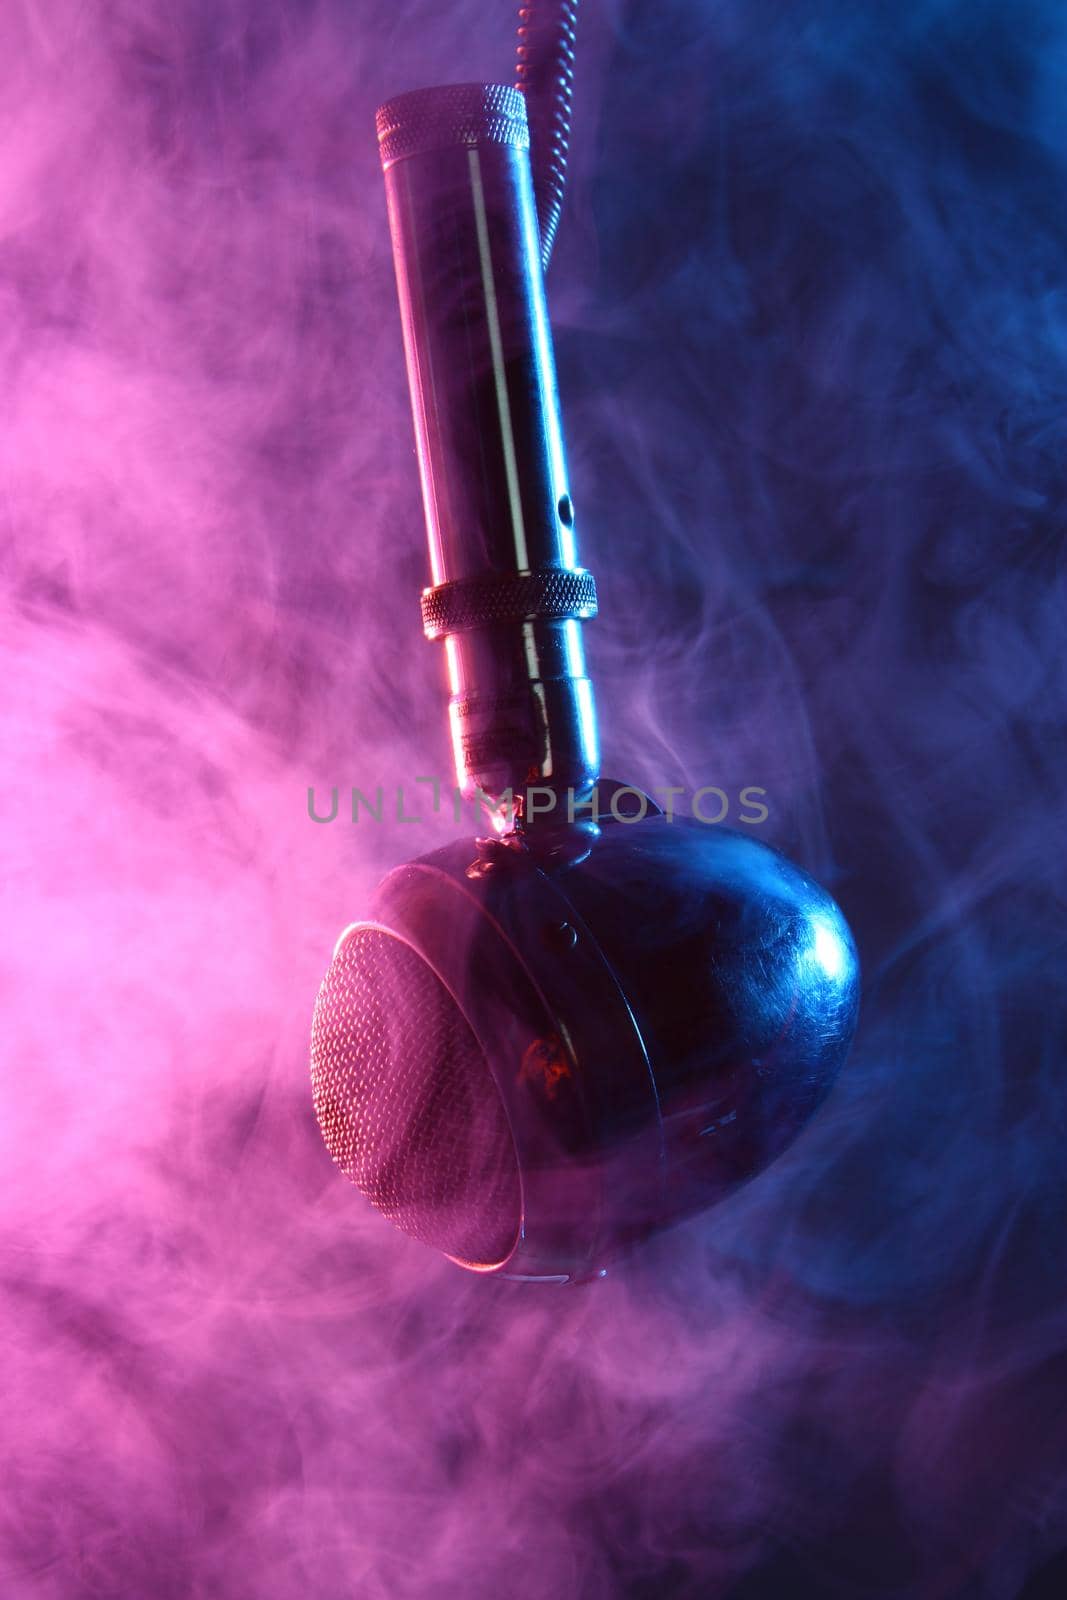 Image of Old egg-shaped microphone surrounded by blue and pink smoke